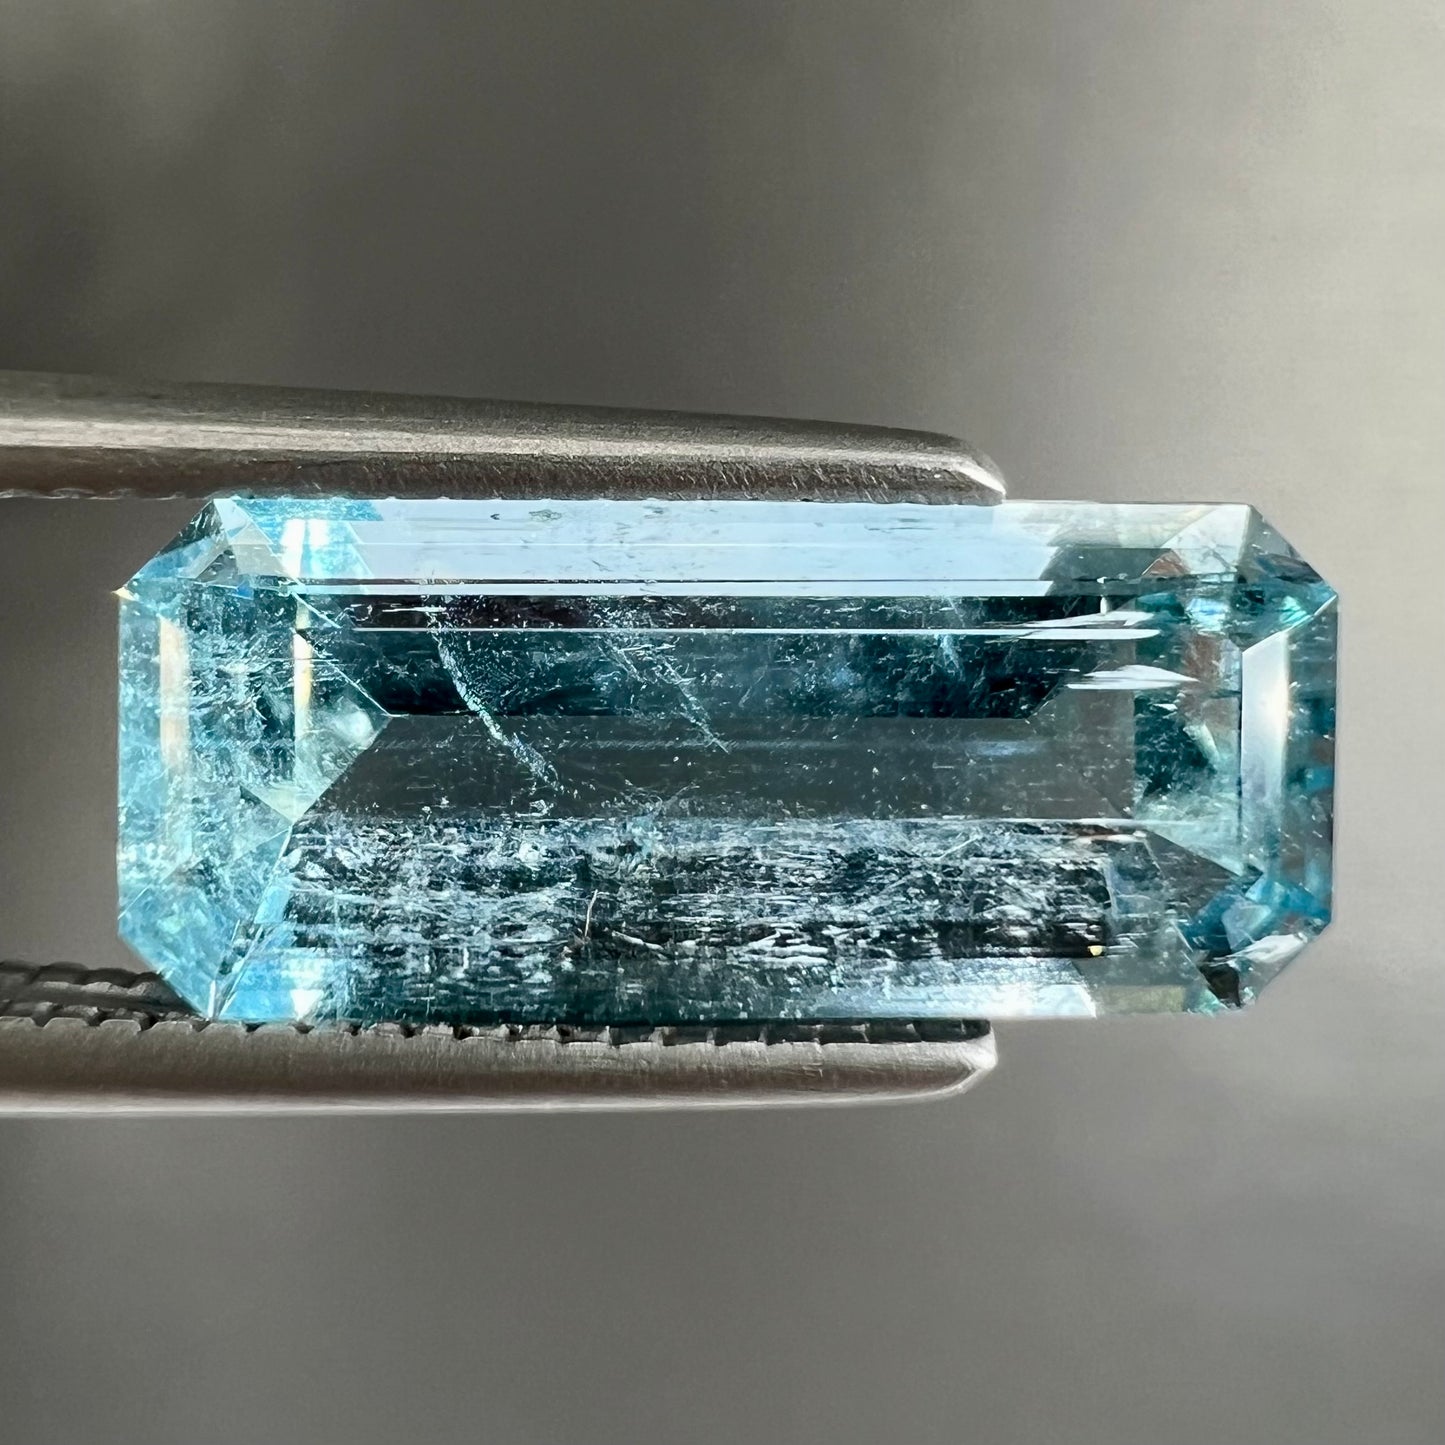 A loose, emerald cut aquamarine stone from Vietnam.  The stone is an ice blue color.